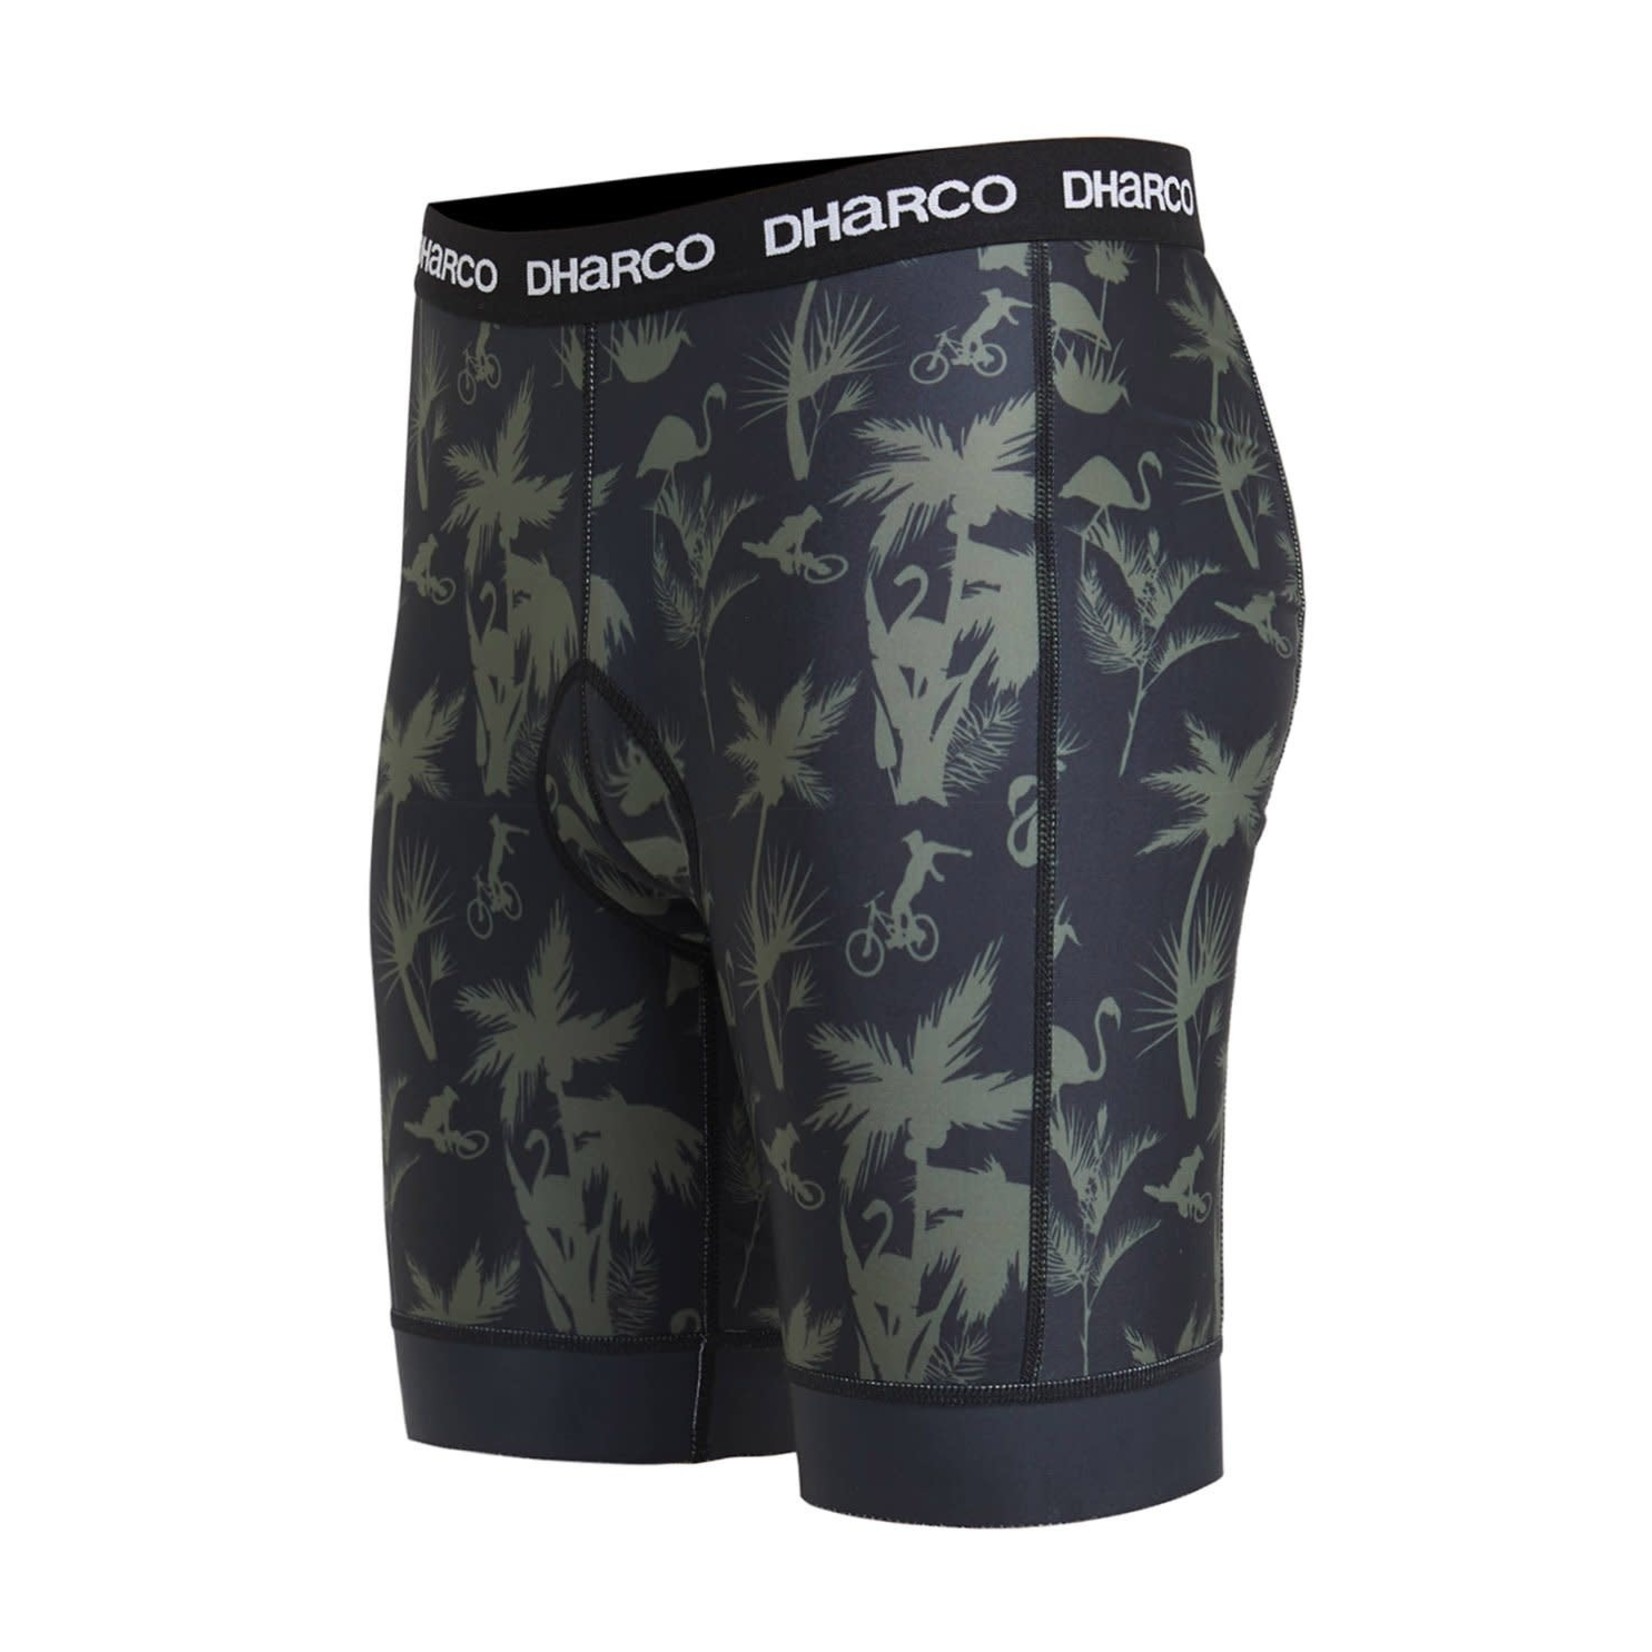 DHARCO DHARCO Party Pants